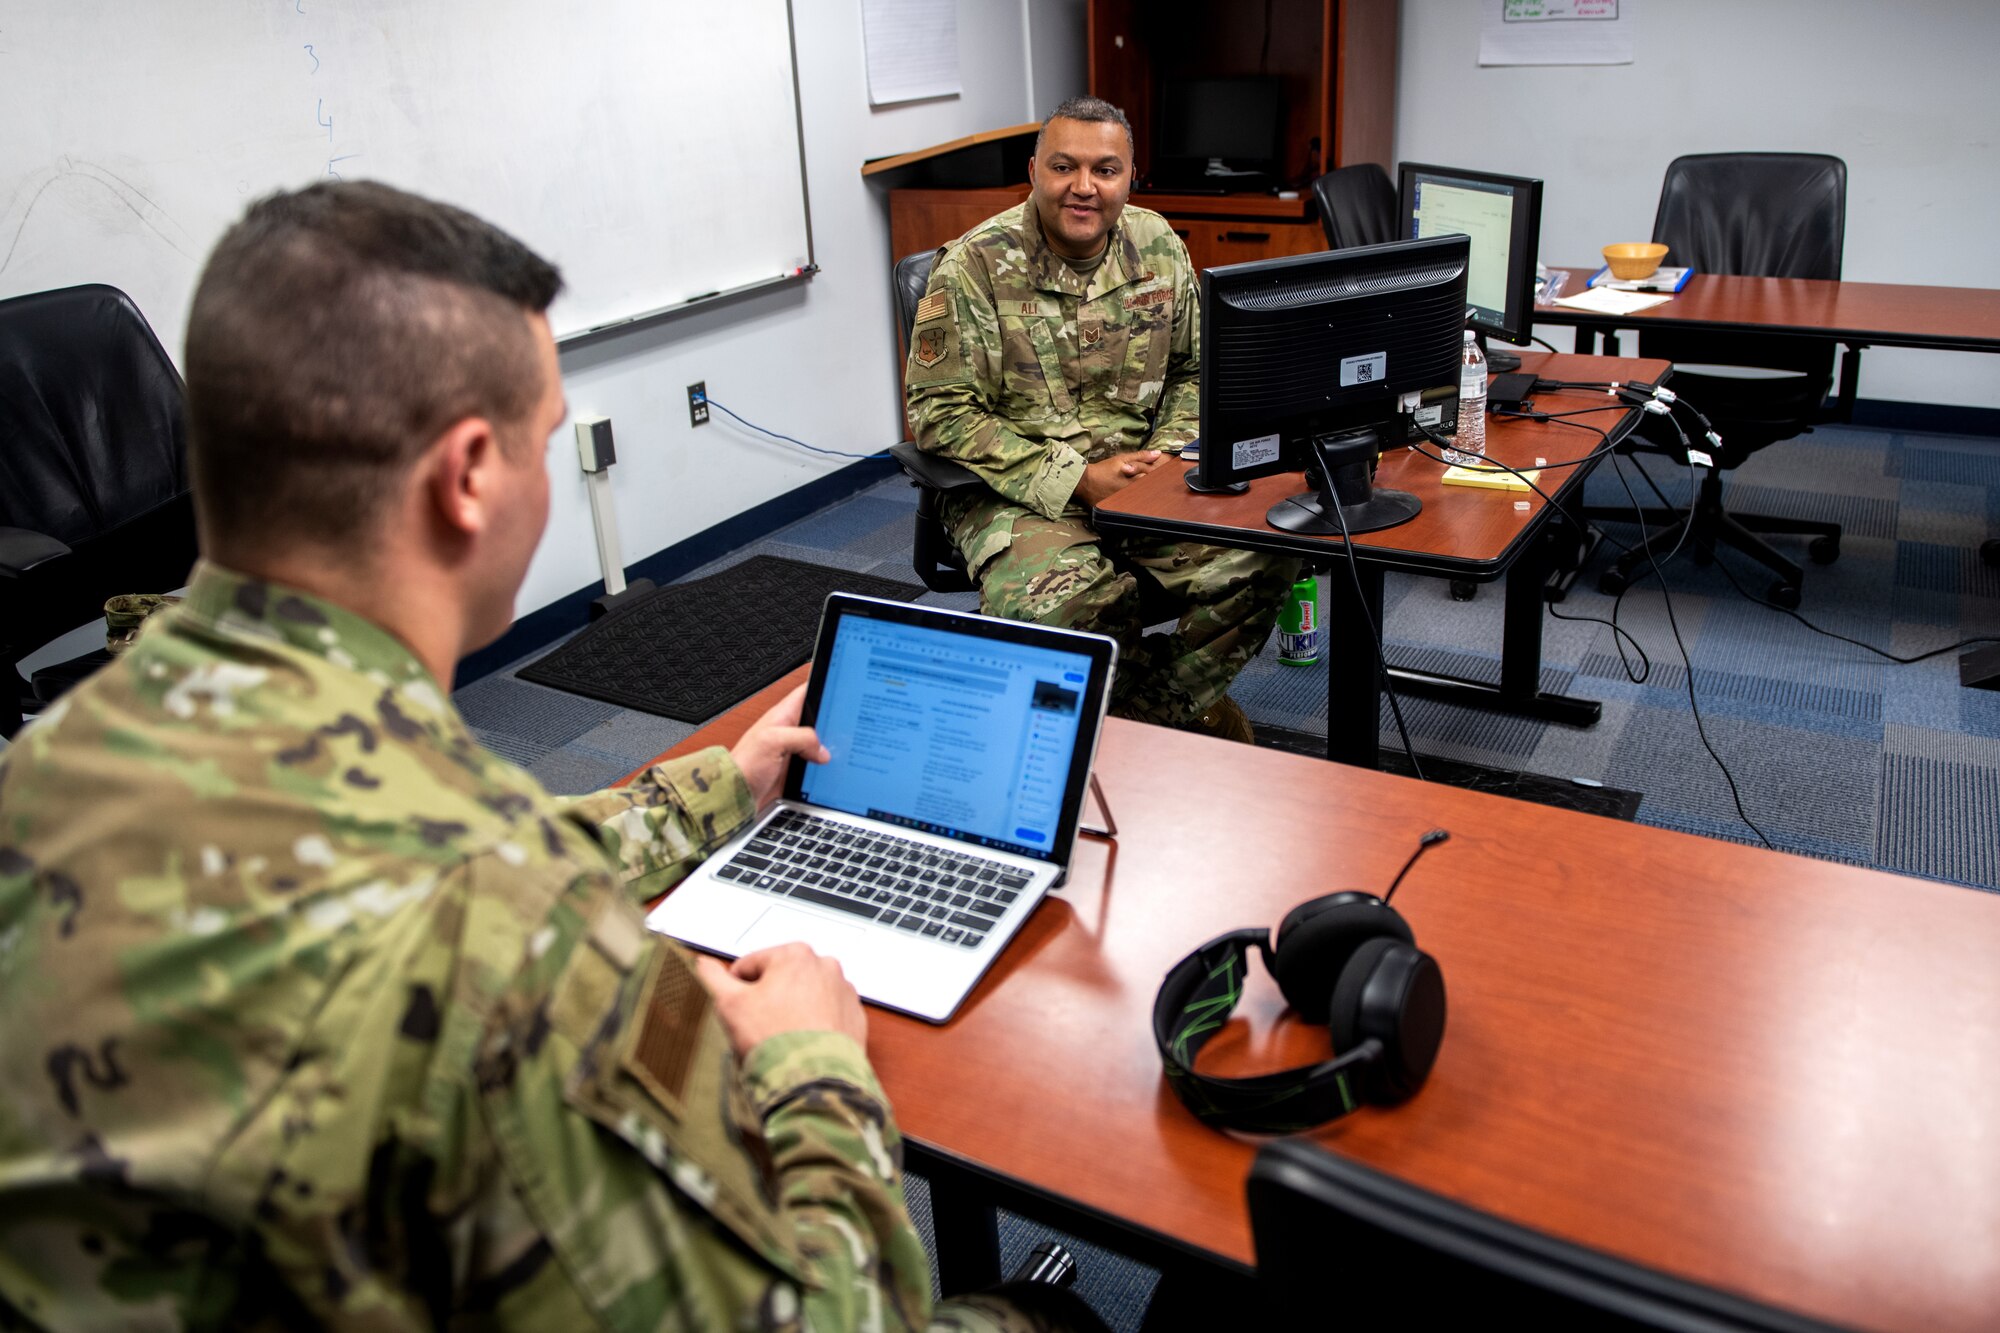 U.S. Air Force Tech. Sgt. Kurt Alie (right), Robert D. Gaylor Non-Commissioned Officer Academy student instructor, receives an evaluation from Tech. Sgt. Michael Napieraj, instructor trainer, while Tech. Sgt. Alie’s virtual class takes a break June 23, 2020, at Joint Base San Antonio-Lackland, Texas.